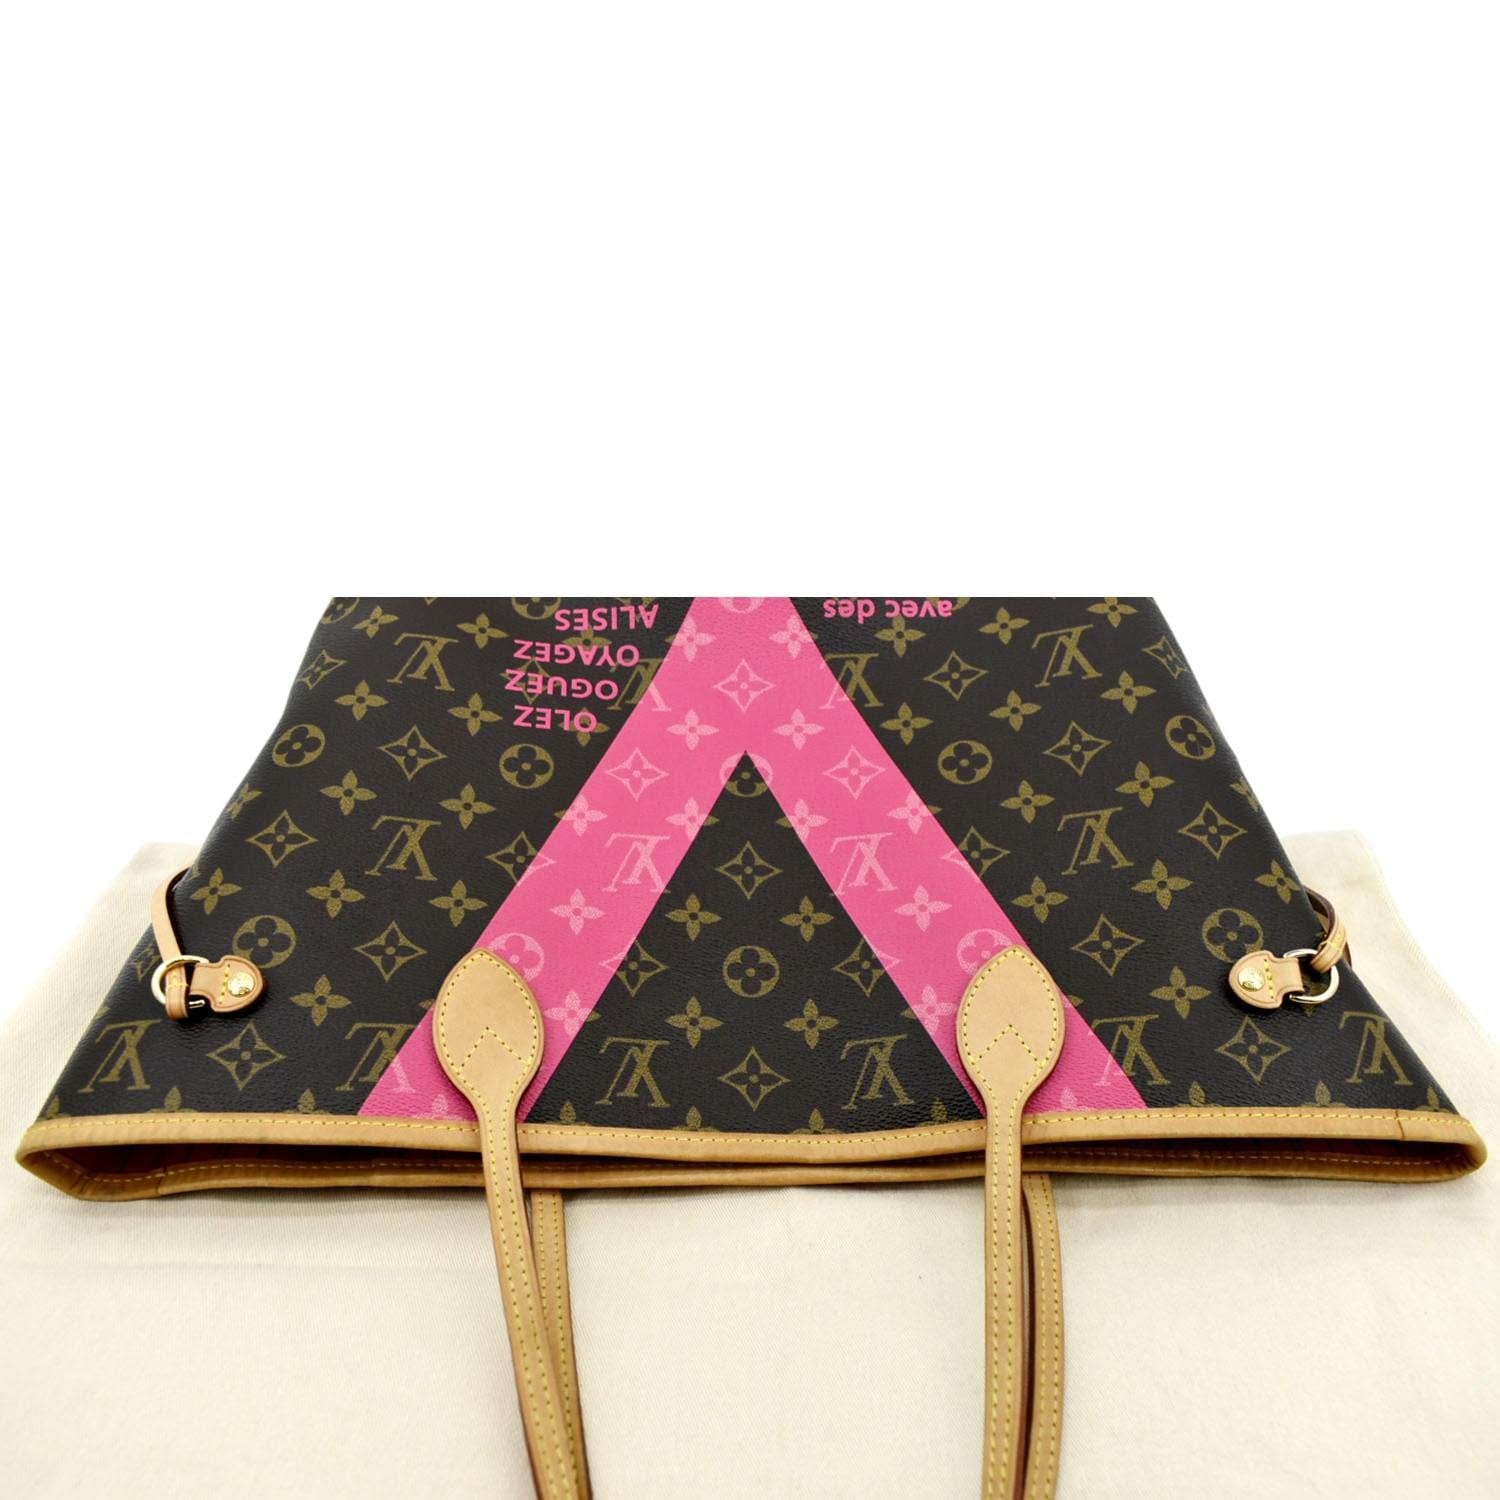 Louis Vuitton, Bags, Louis Vuitton V Neverfull Mm Grenade Pink Monogram  Limited Edition Tote